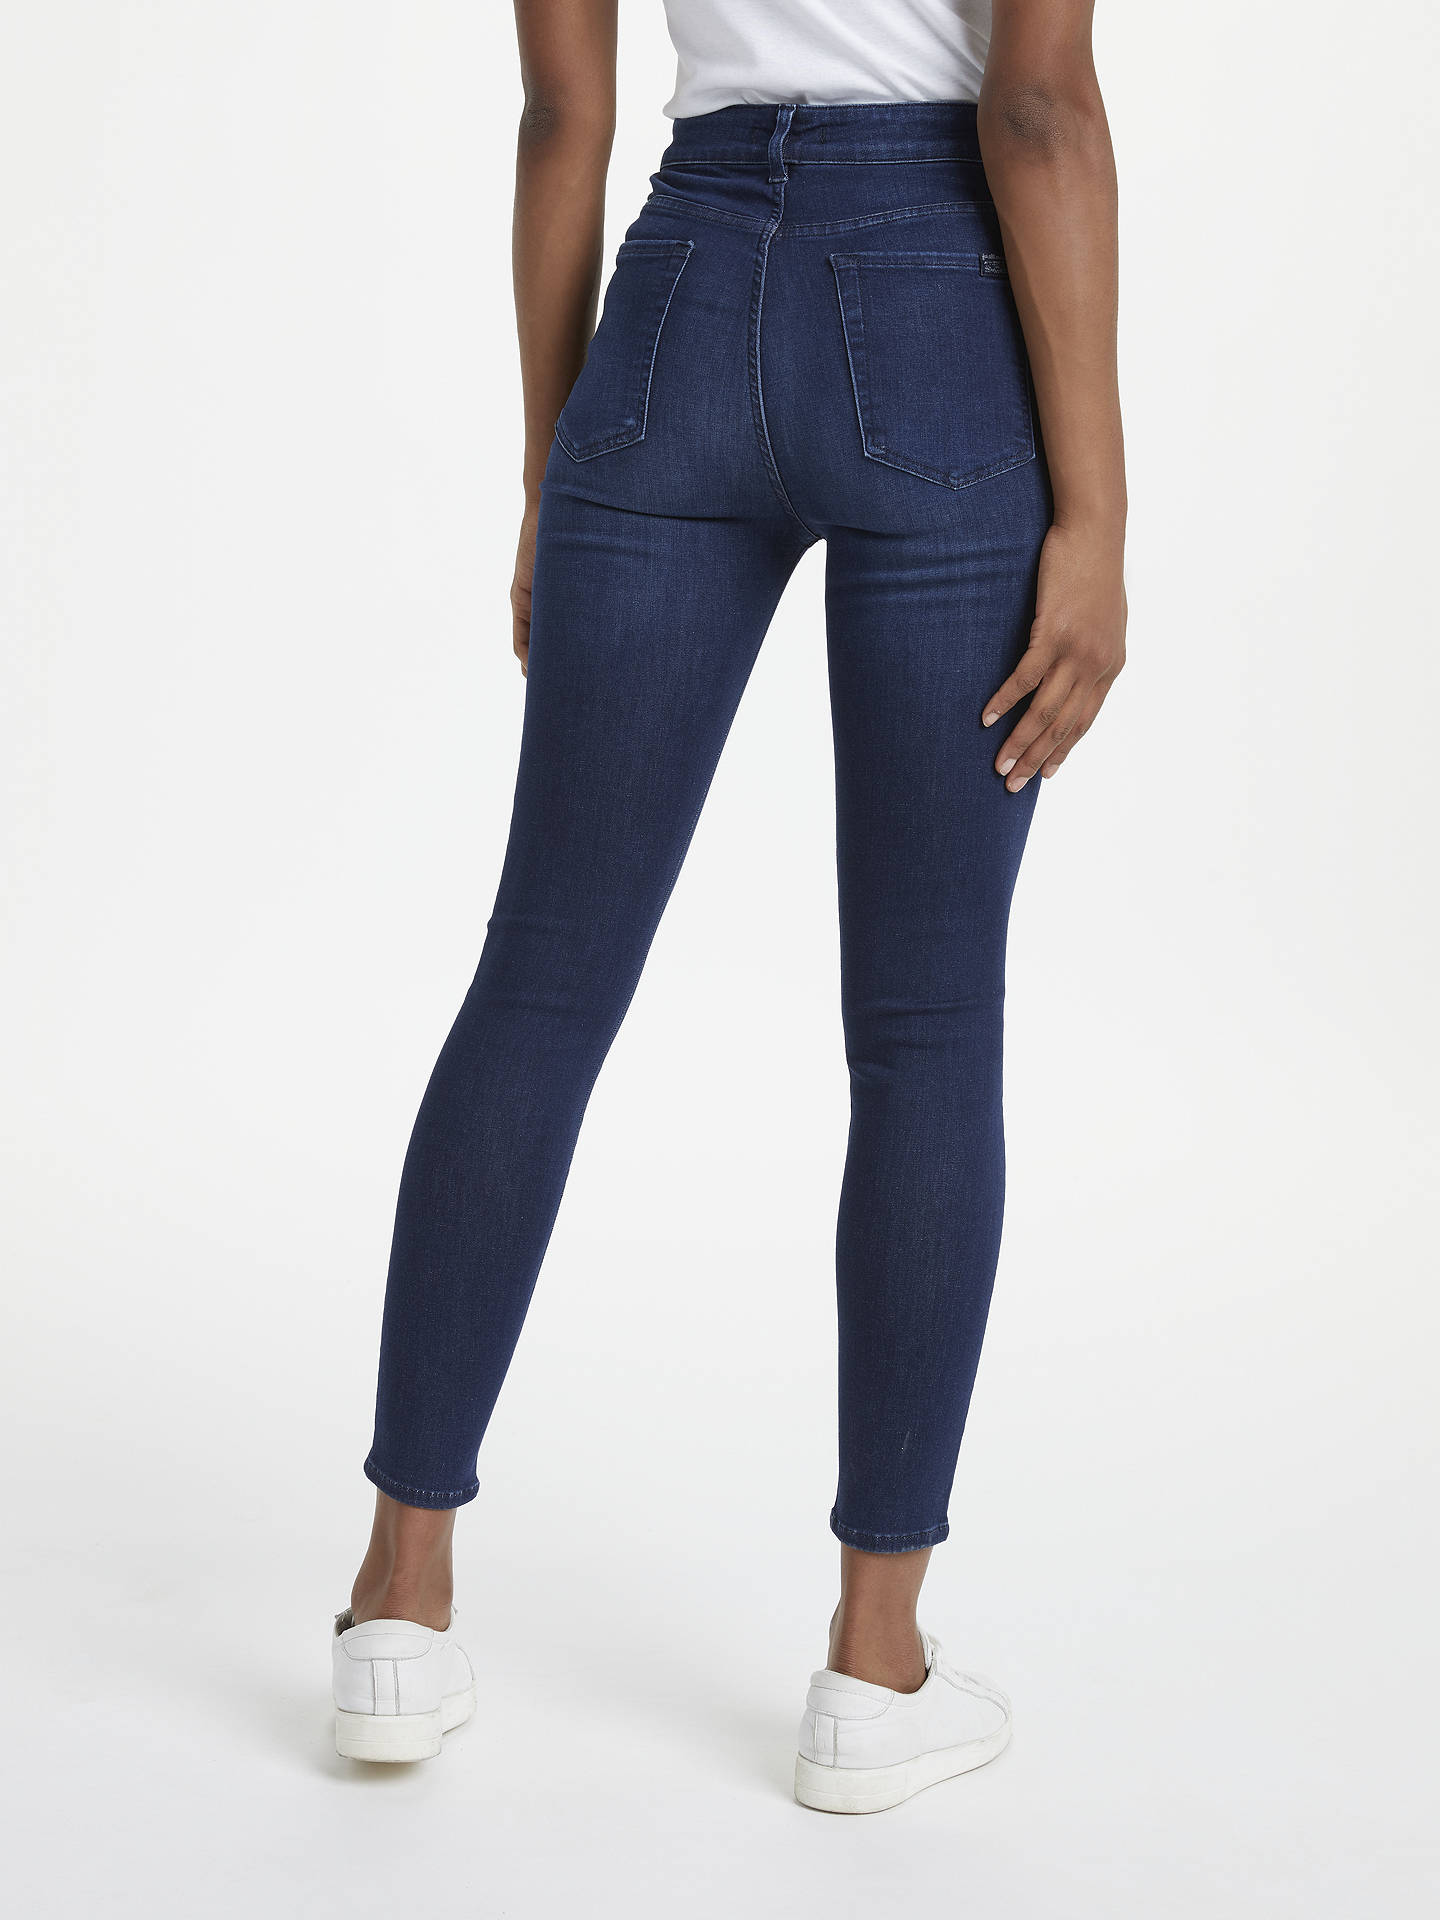 7 For All Mankind Aubrey Slim Illusion Jeans Primary Blue At John Lewis Partners